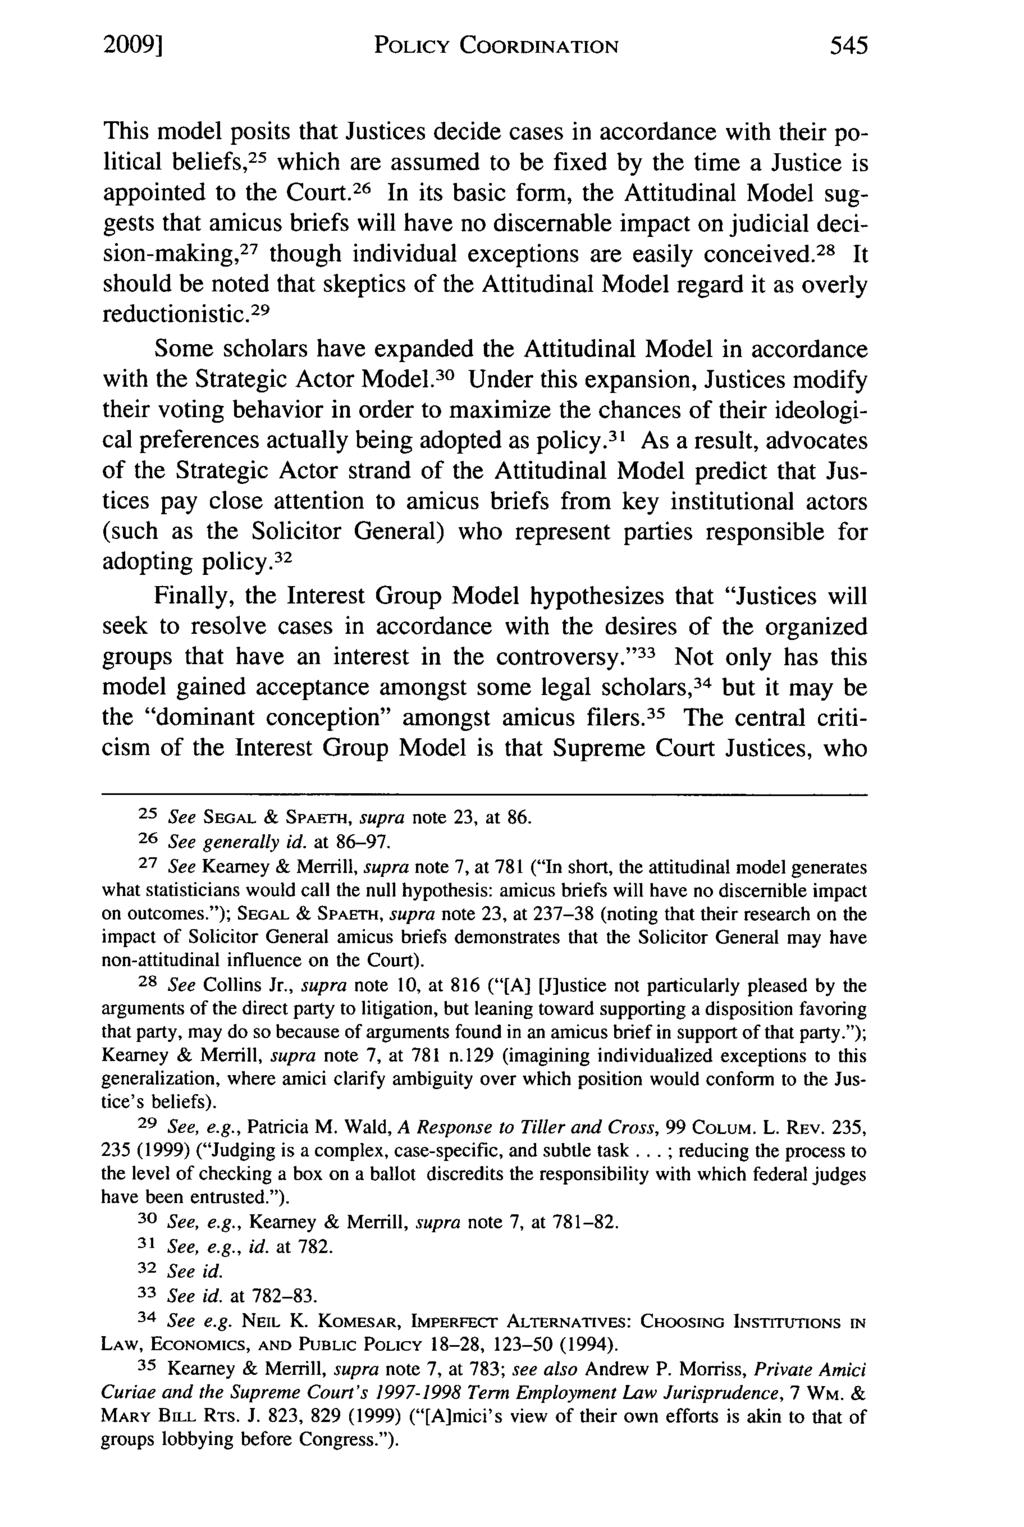 2009] POLICY COORDINATION This model posits that Justices decide cases in accordance with their political beliefs 25 which are assumed to be fixed by the time a Justice is appointed to the Court.